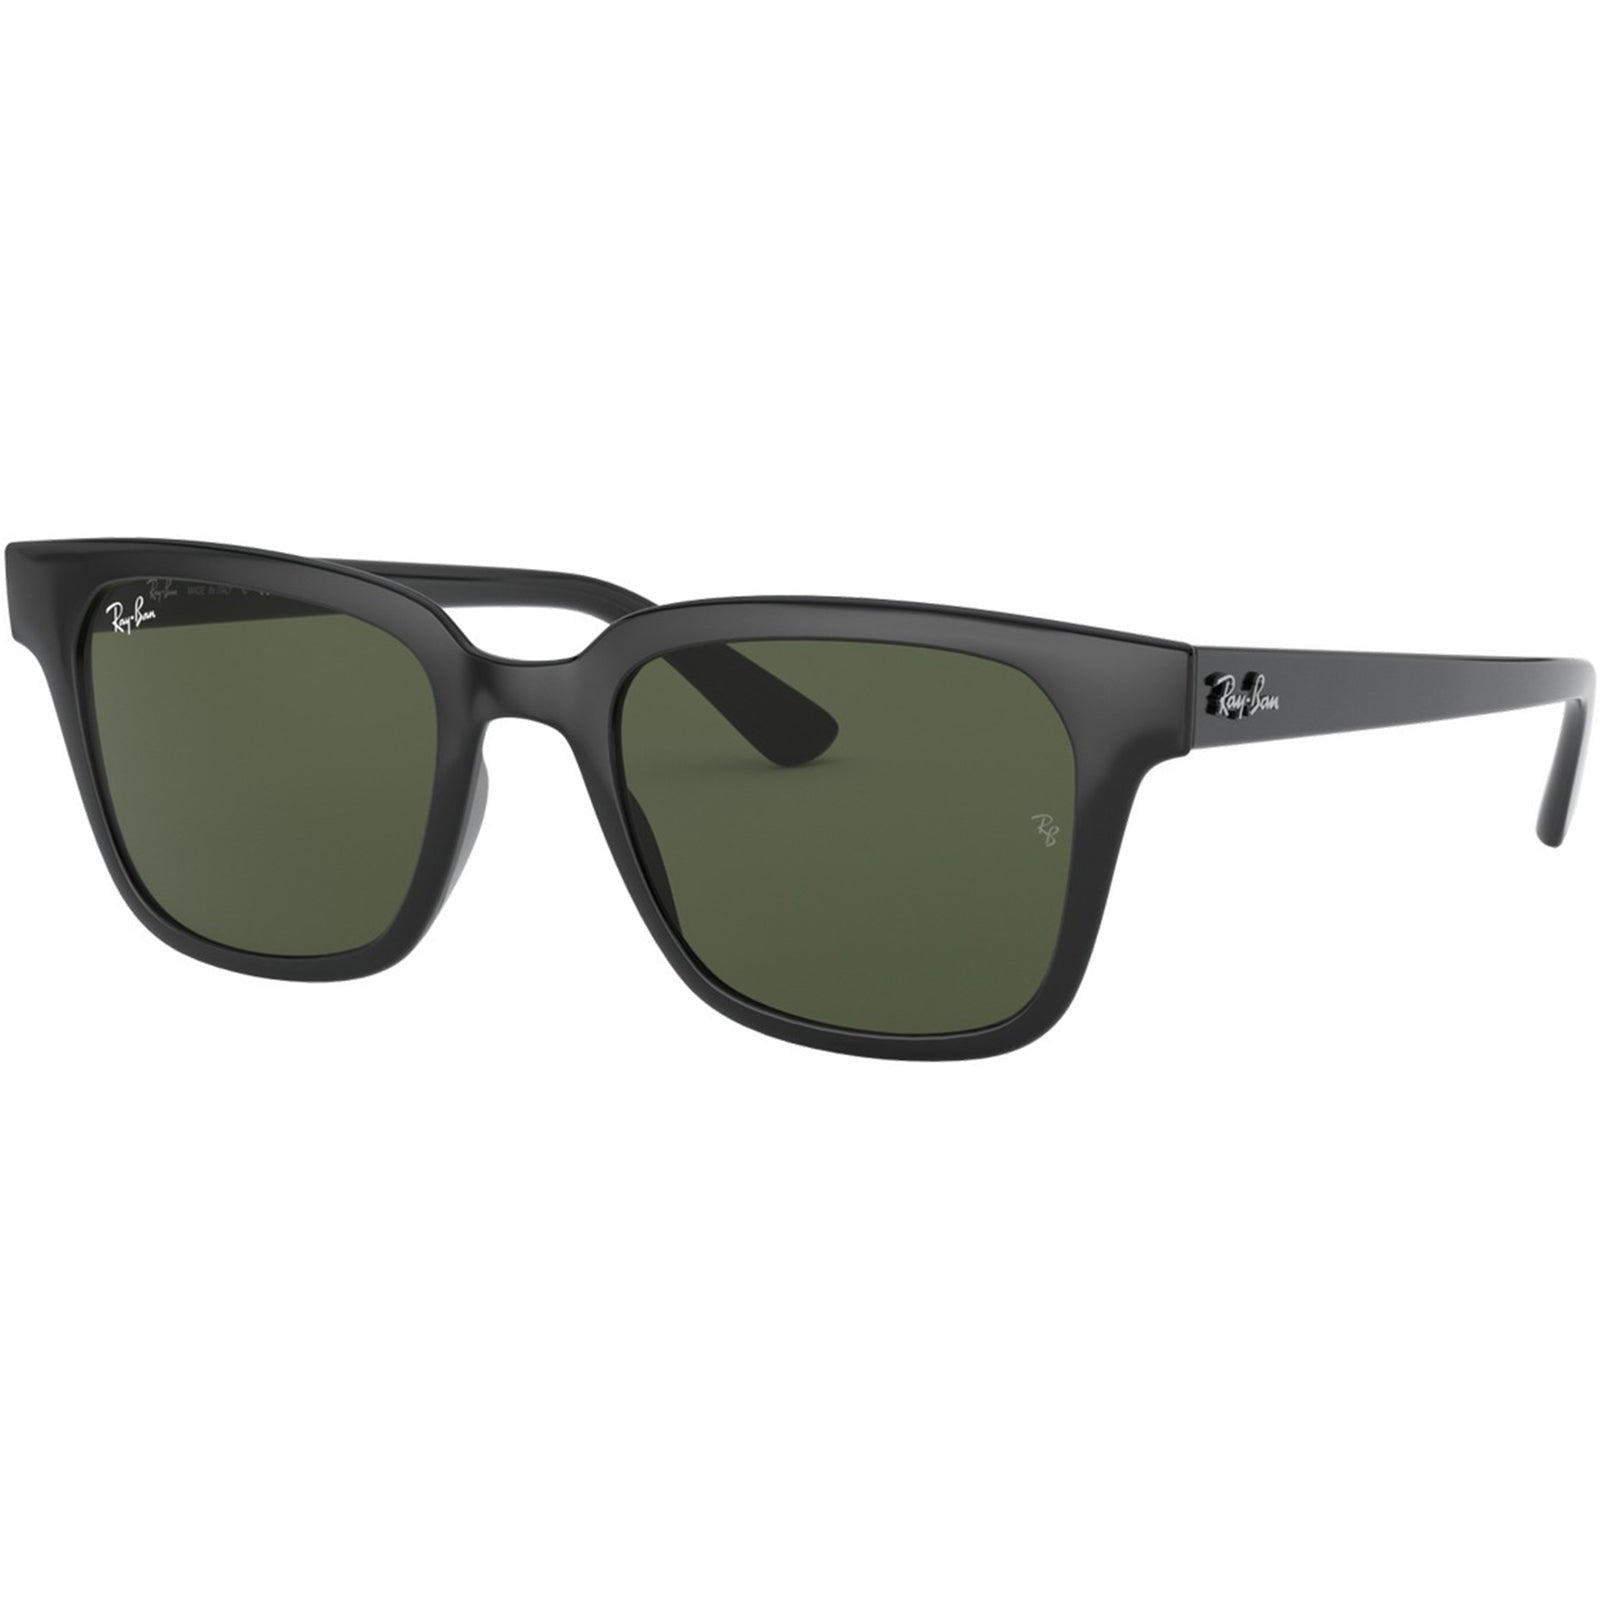 Ray-Ban RB4323 Adult Lifestyle Sunglasses-0RB4323